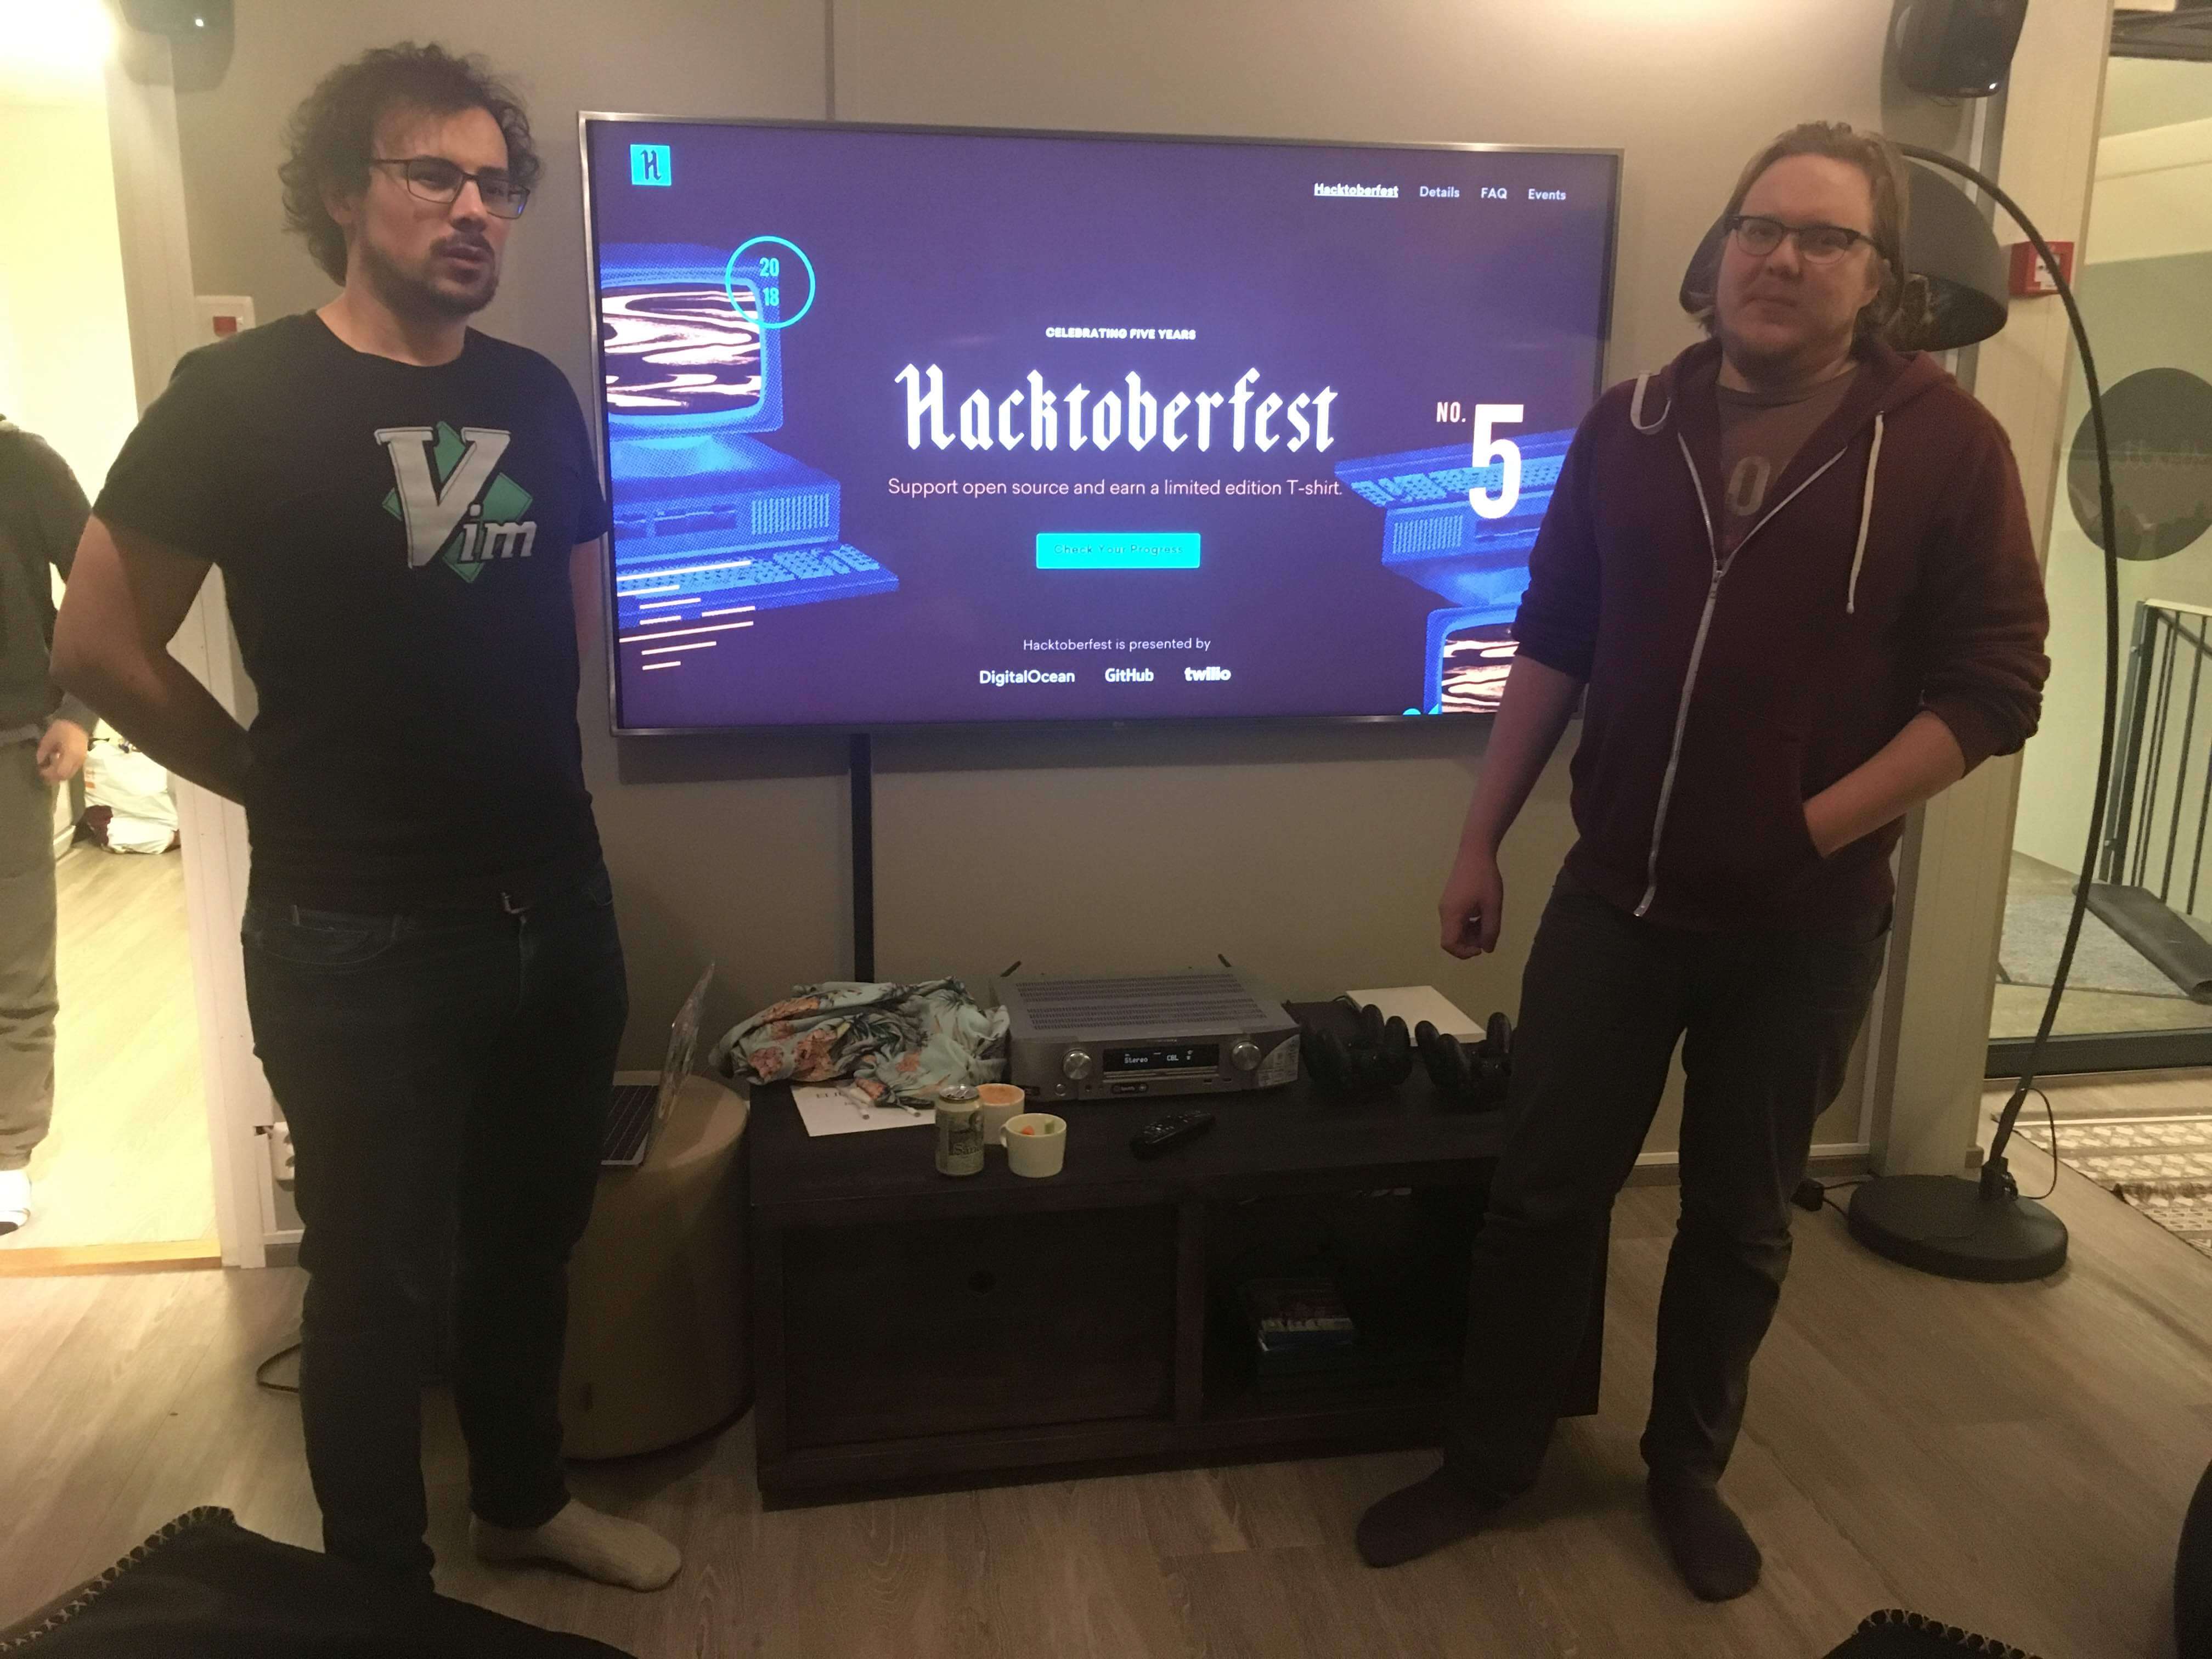 Joonas and Thibaud, standing on each side of the big screen, present Hacktoberfest to the audience. They look happy.